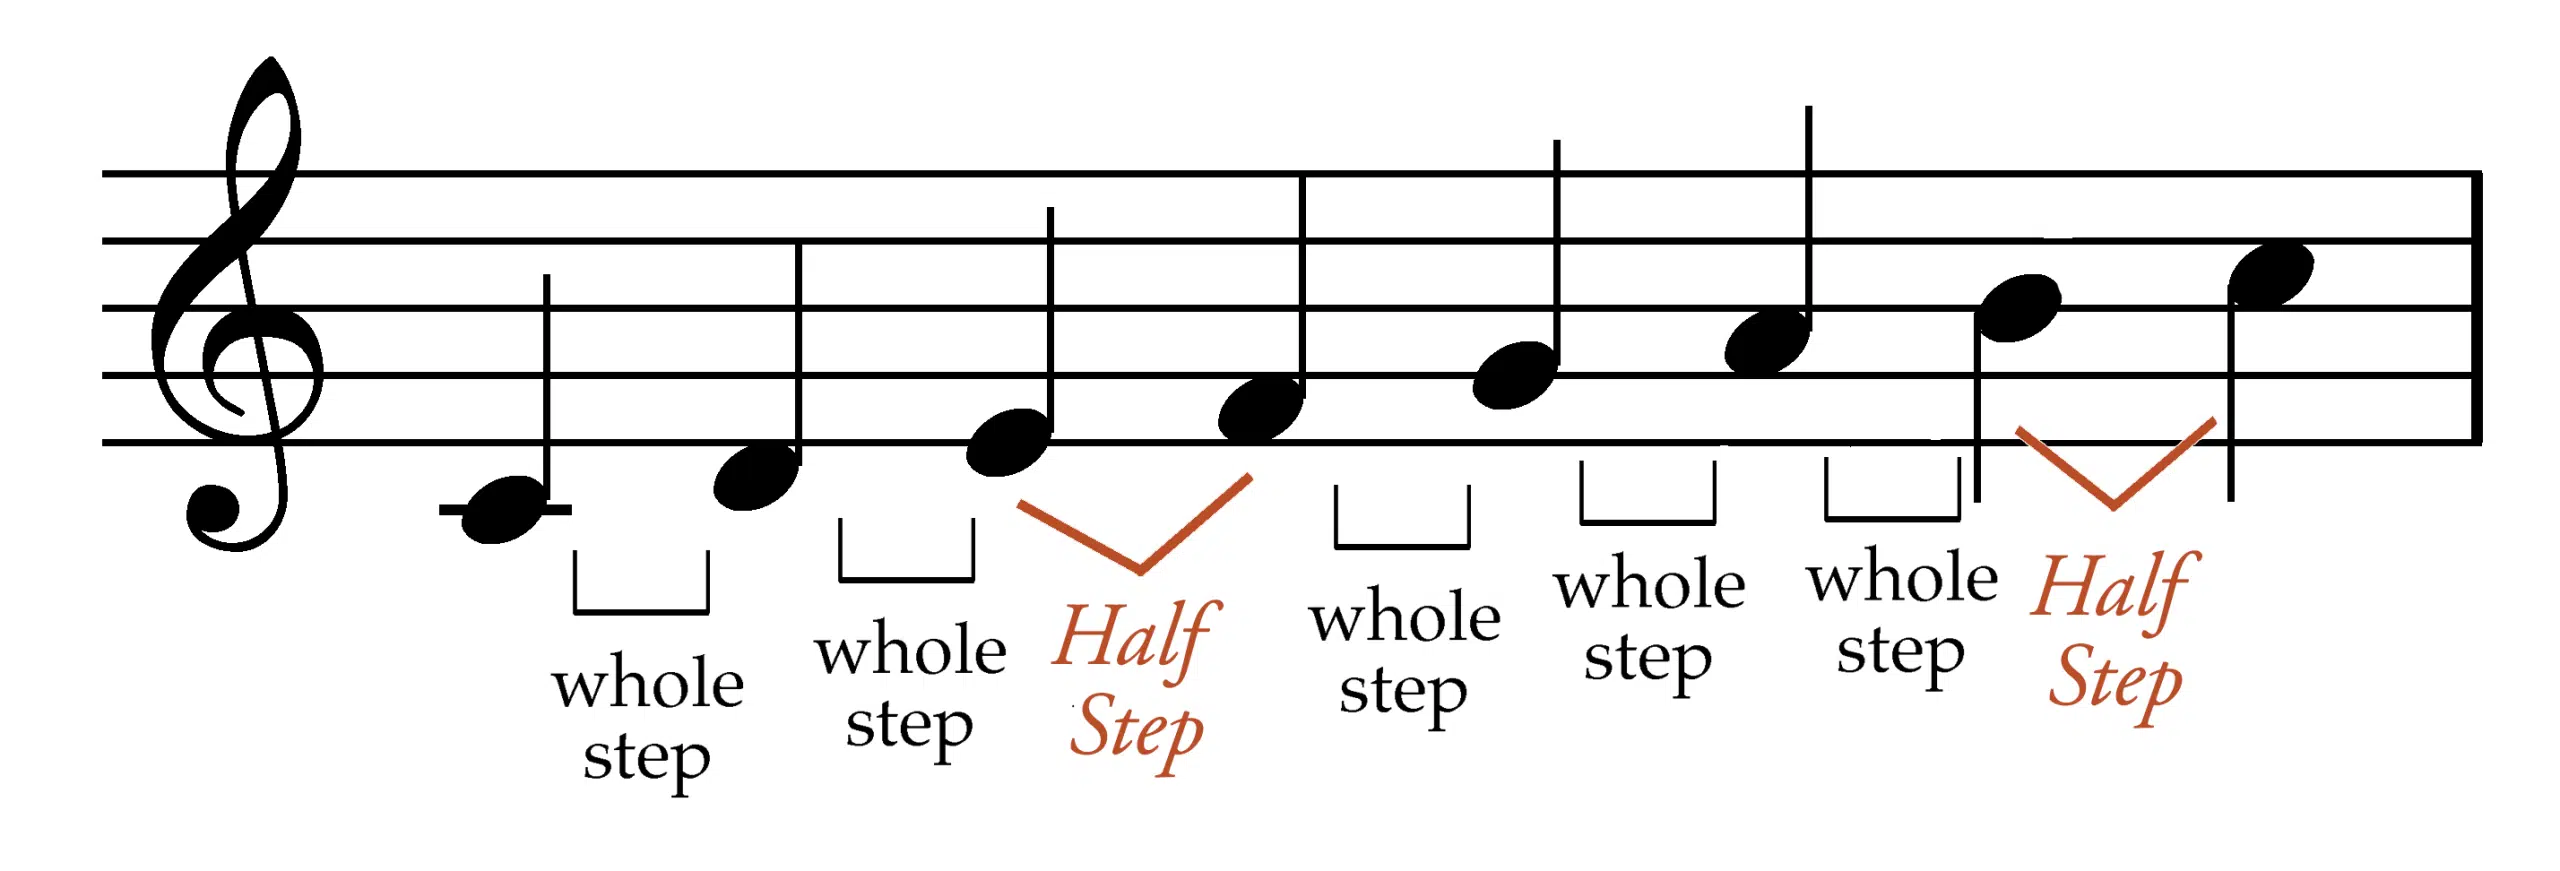 Major Scale Whole and Half Steps - Circle of fifths - Unison Audio